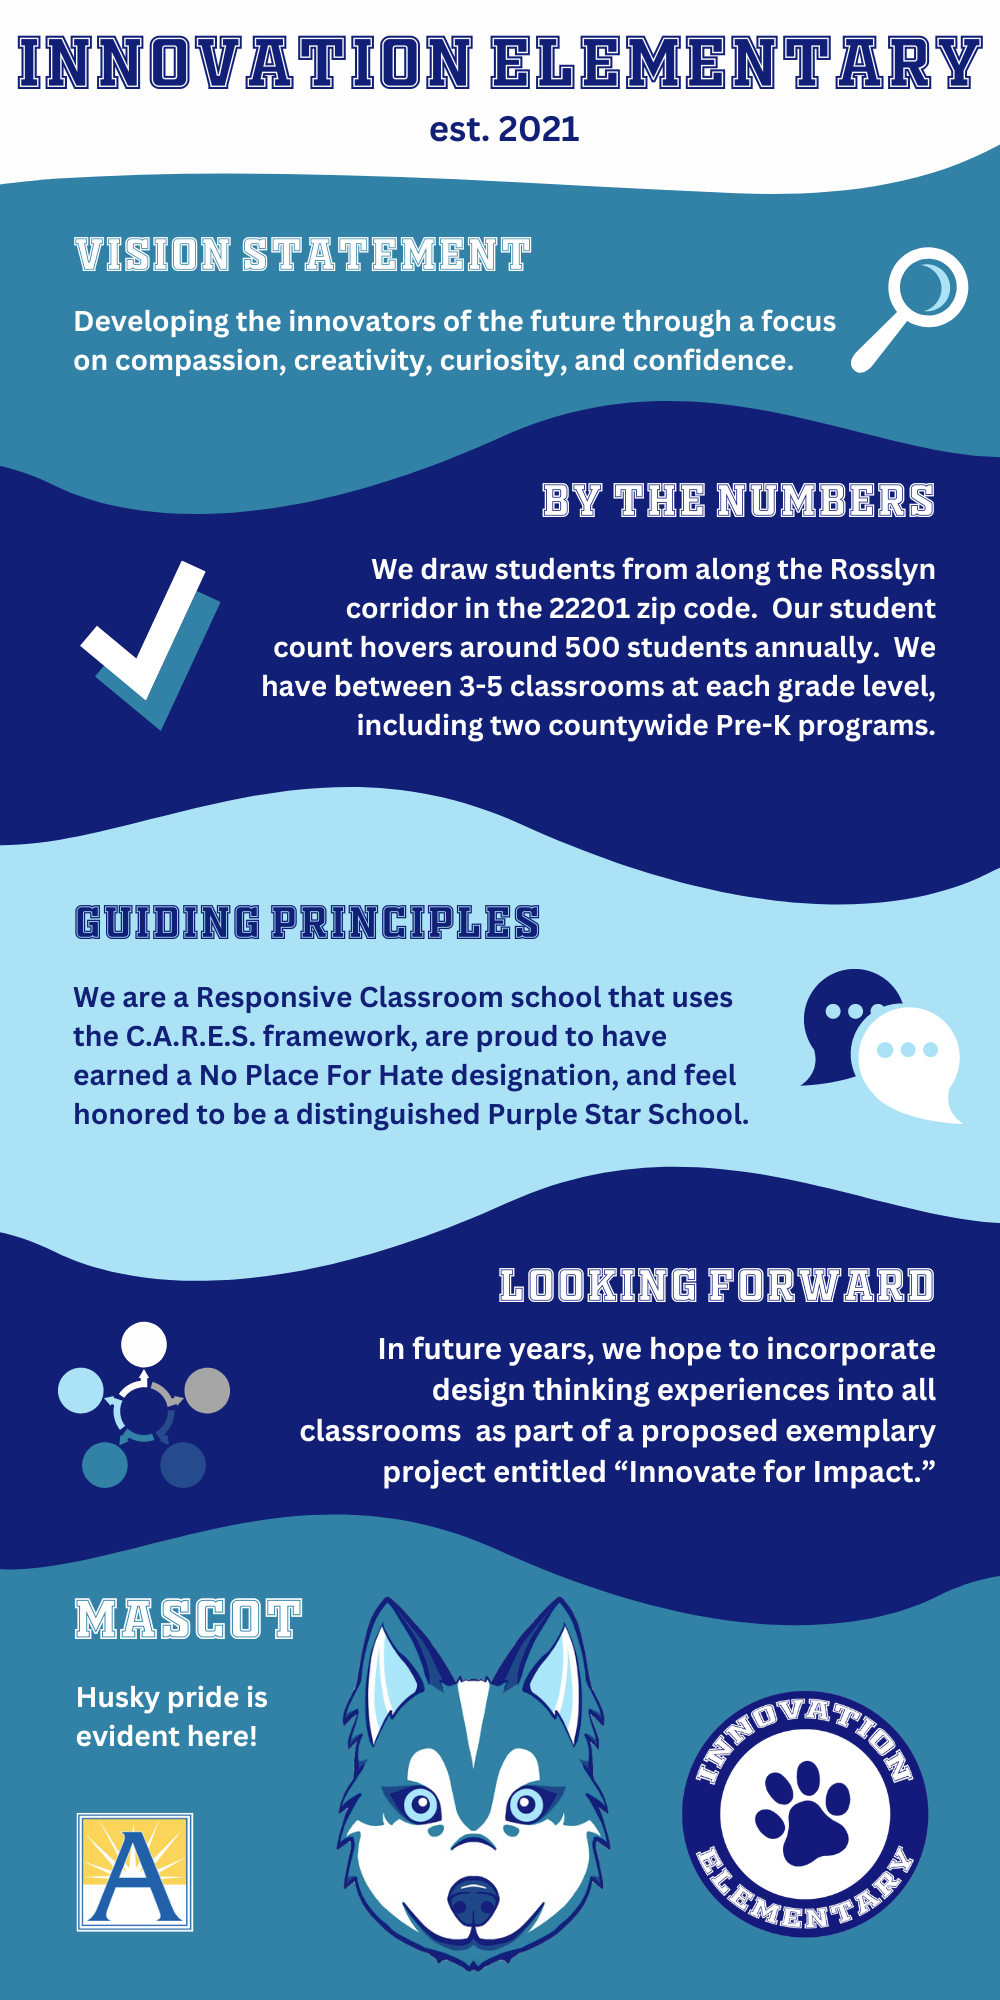 Infographic about Innovation Elementary, including vision statement, by the numbers, guiding principles, looking forward, and mascot